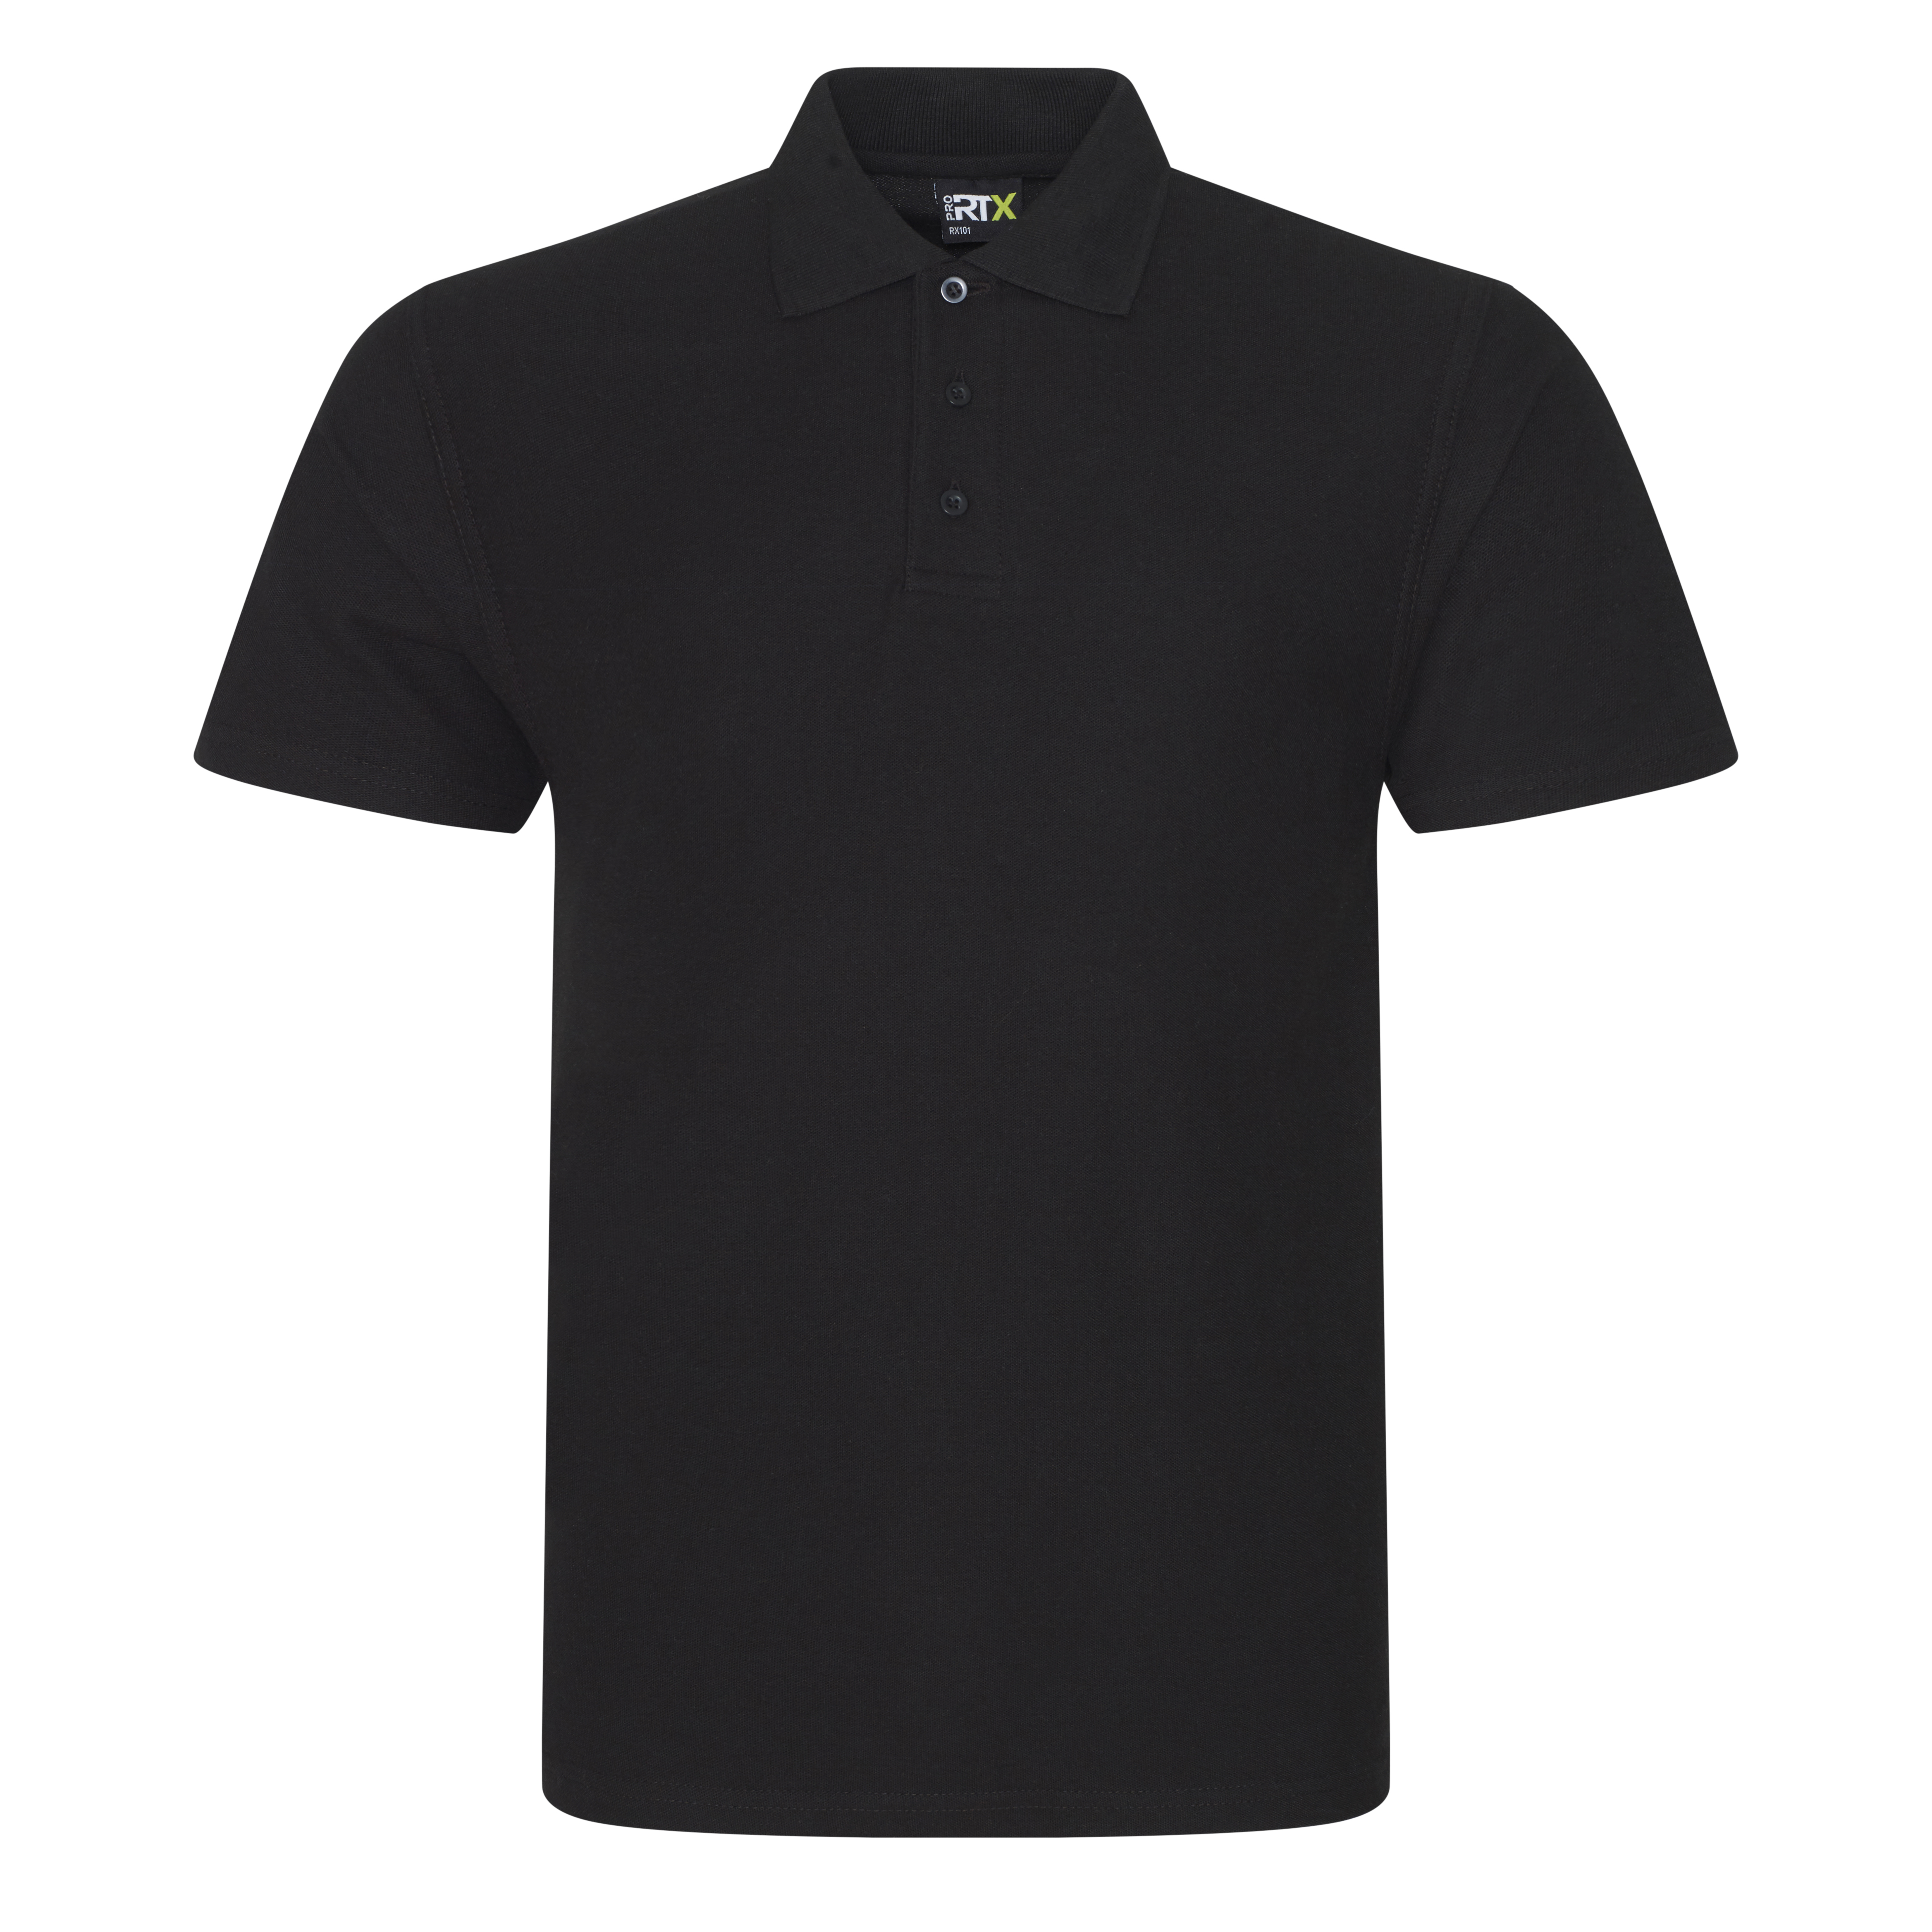 ax-httpswebsystems.s3.amazonaws.comtmp_for_downloadpro-polo-black.jpg